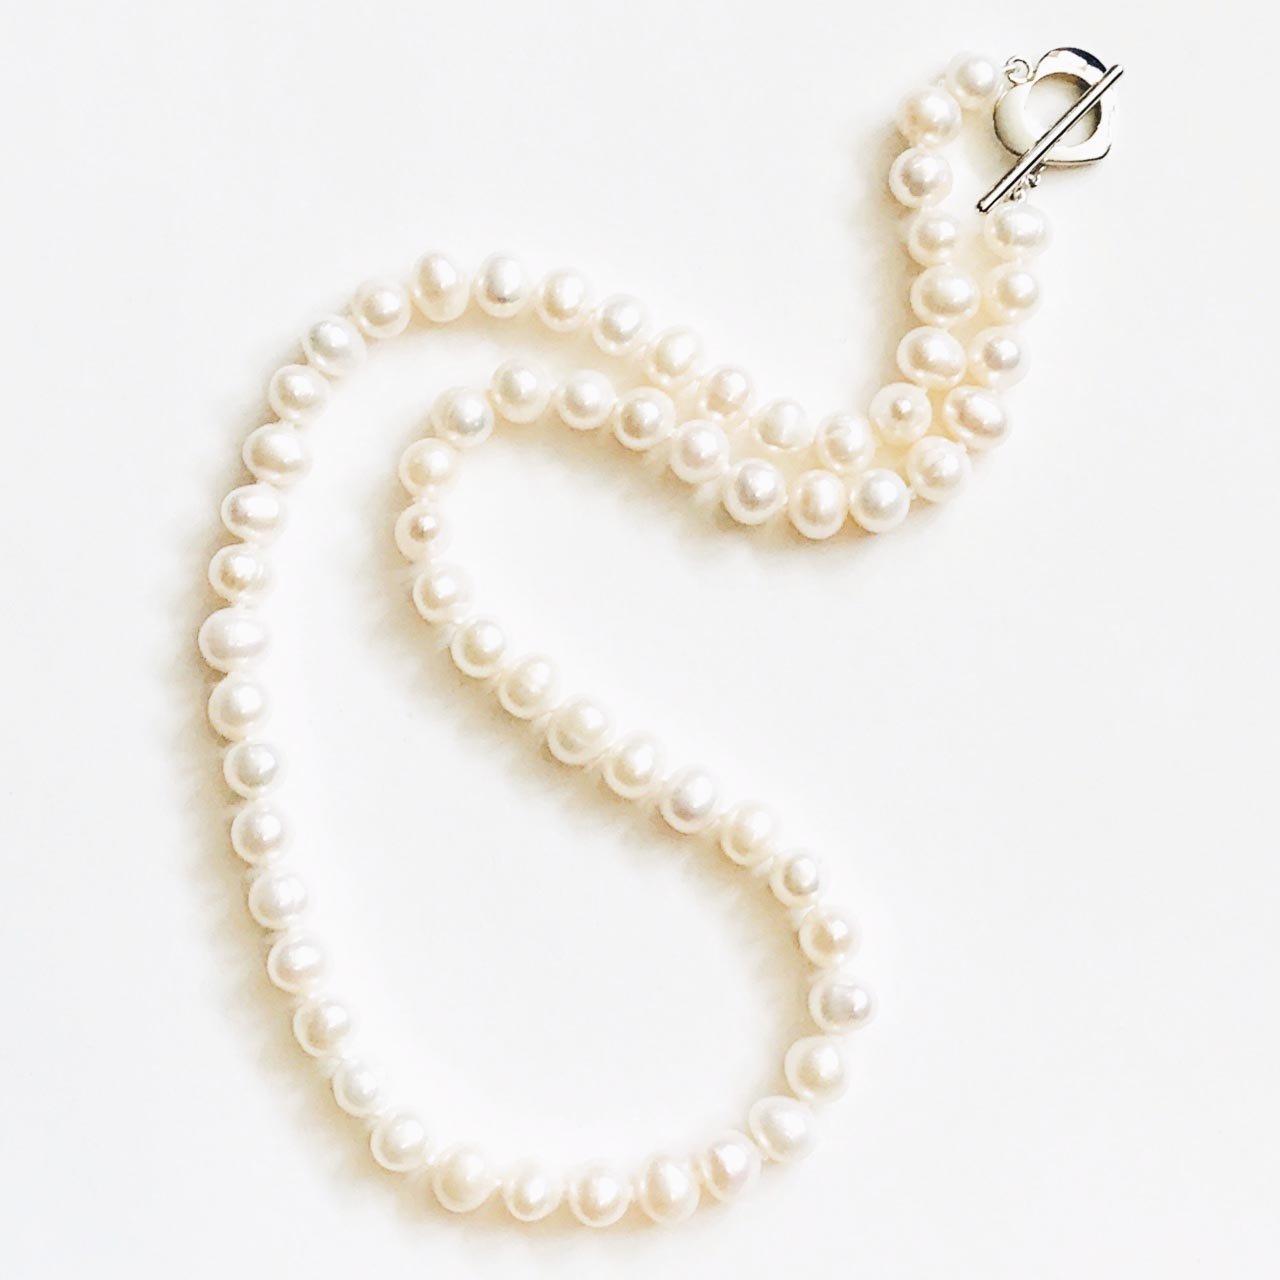 Load image into Gallery viewer, Freshwater Pearl Necklace in Cream Beachdashery® Jewelry
